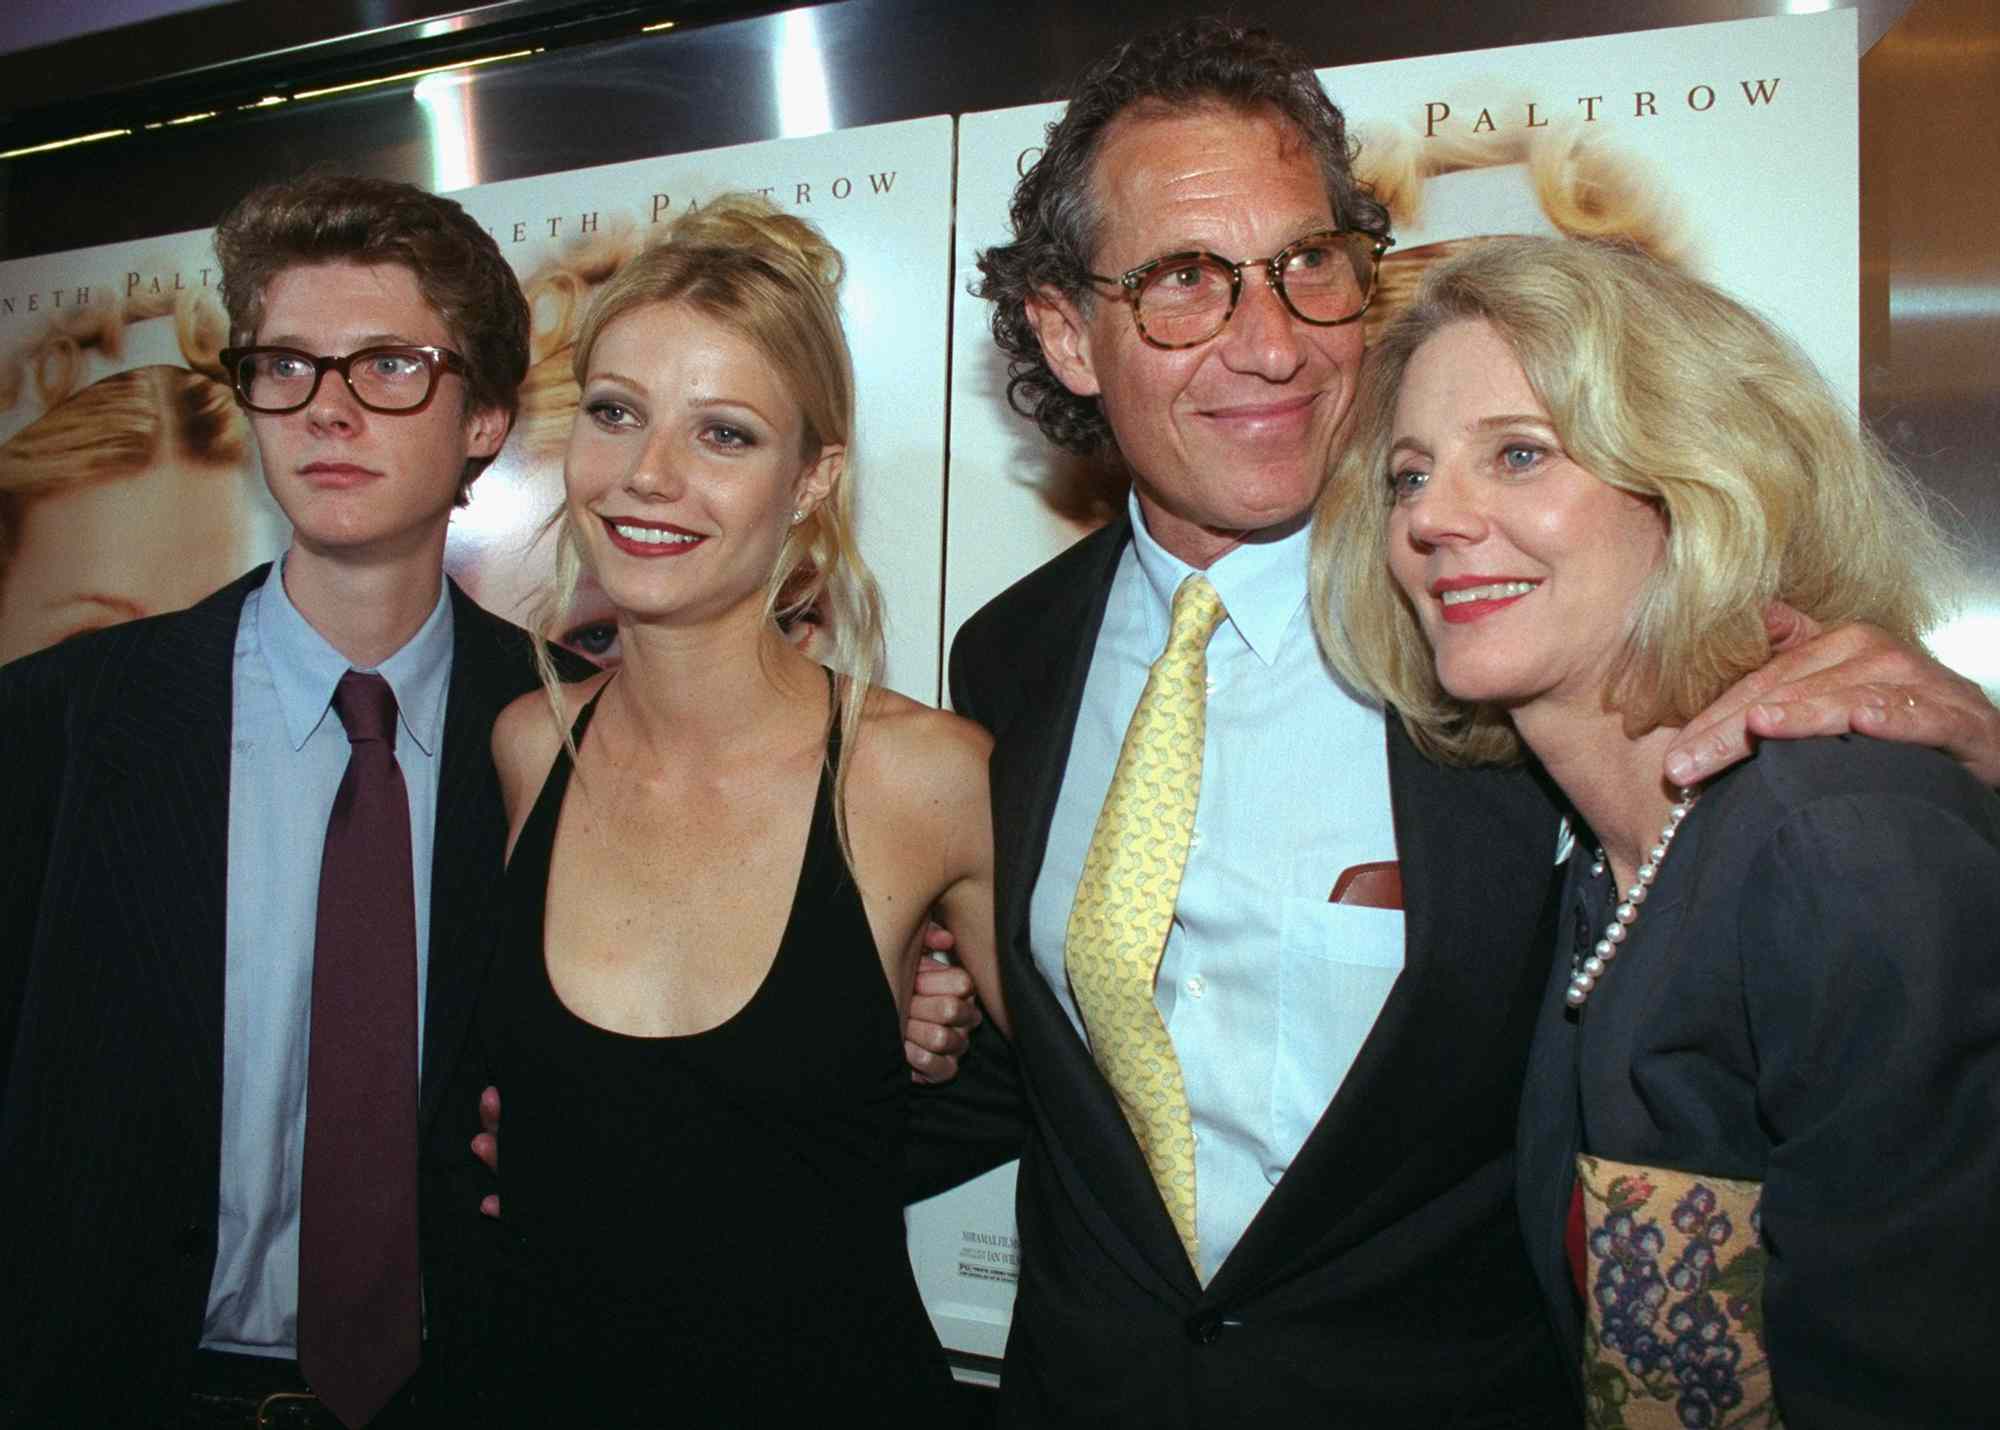 Jake Paltrow, Gwyneth Paltrow, Bruce Paltrow, and Blythe Danner at the Paris Theater for the premiere of "Emma".